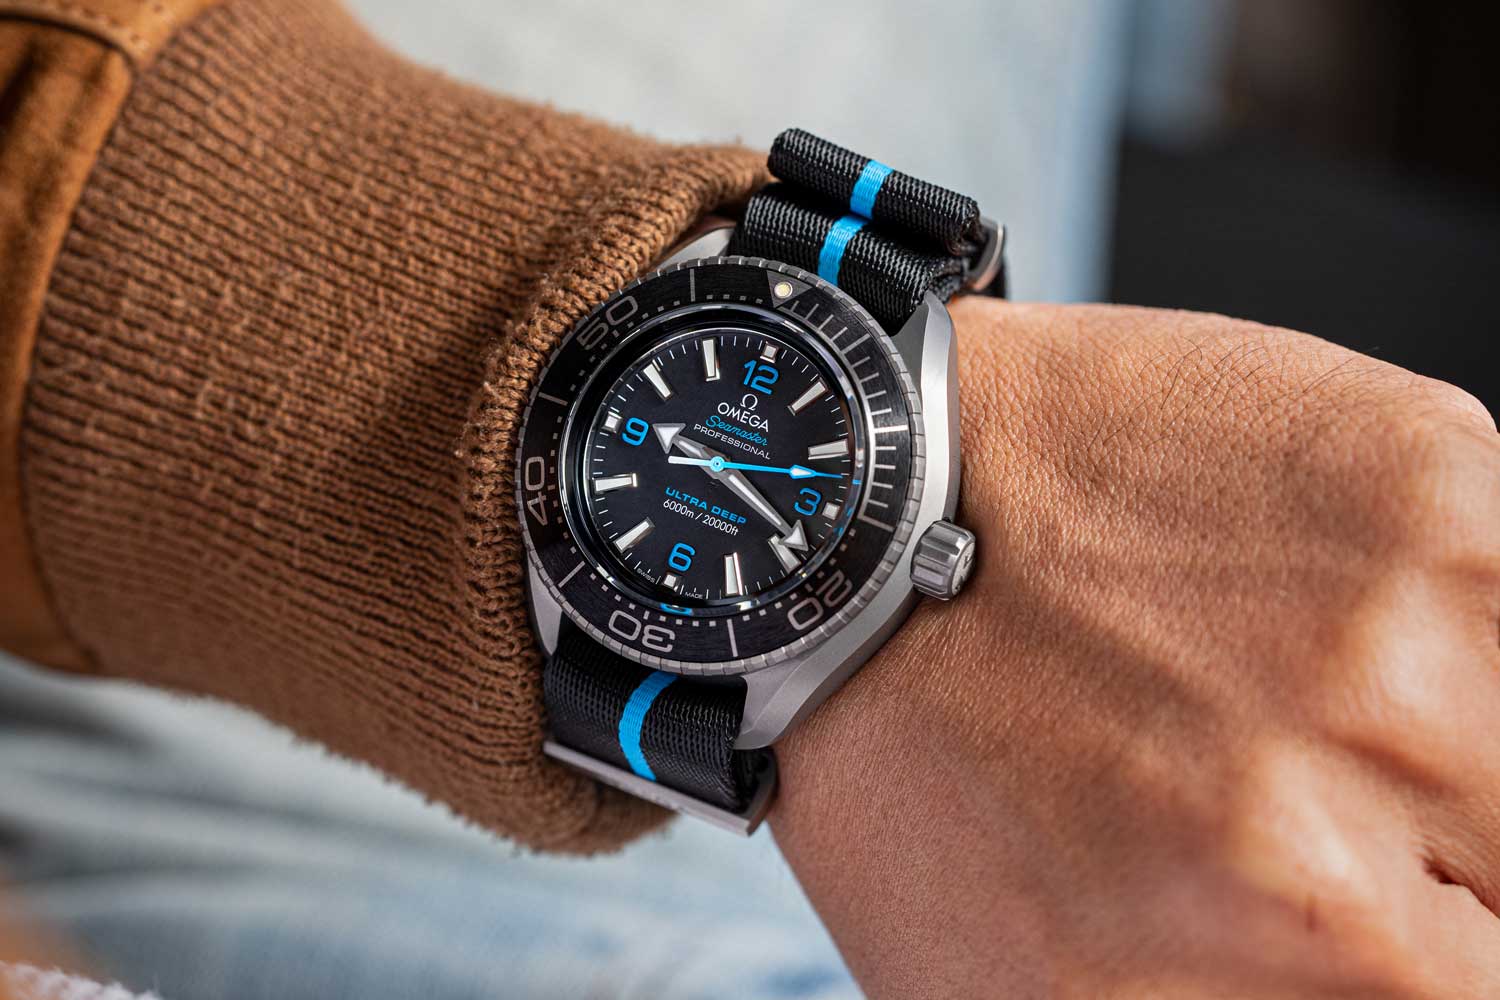 The Ultra Deep titanium wears comfortably on the wrist despite its size. A matching titanium bracelet would have been nice but you can’t go wrong with a NATO strap from Omega. (Image: Revolution©)